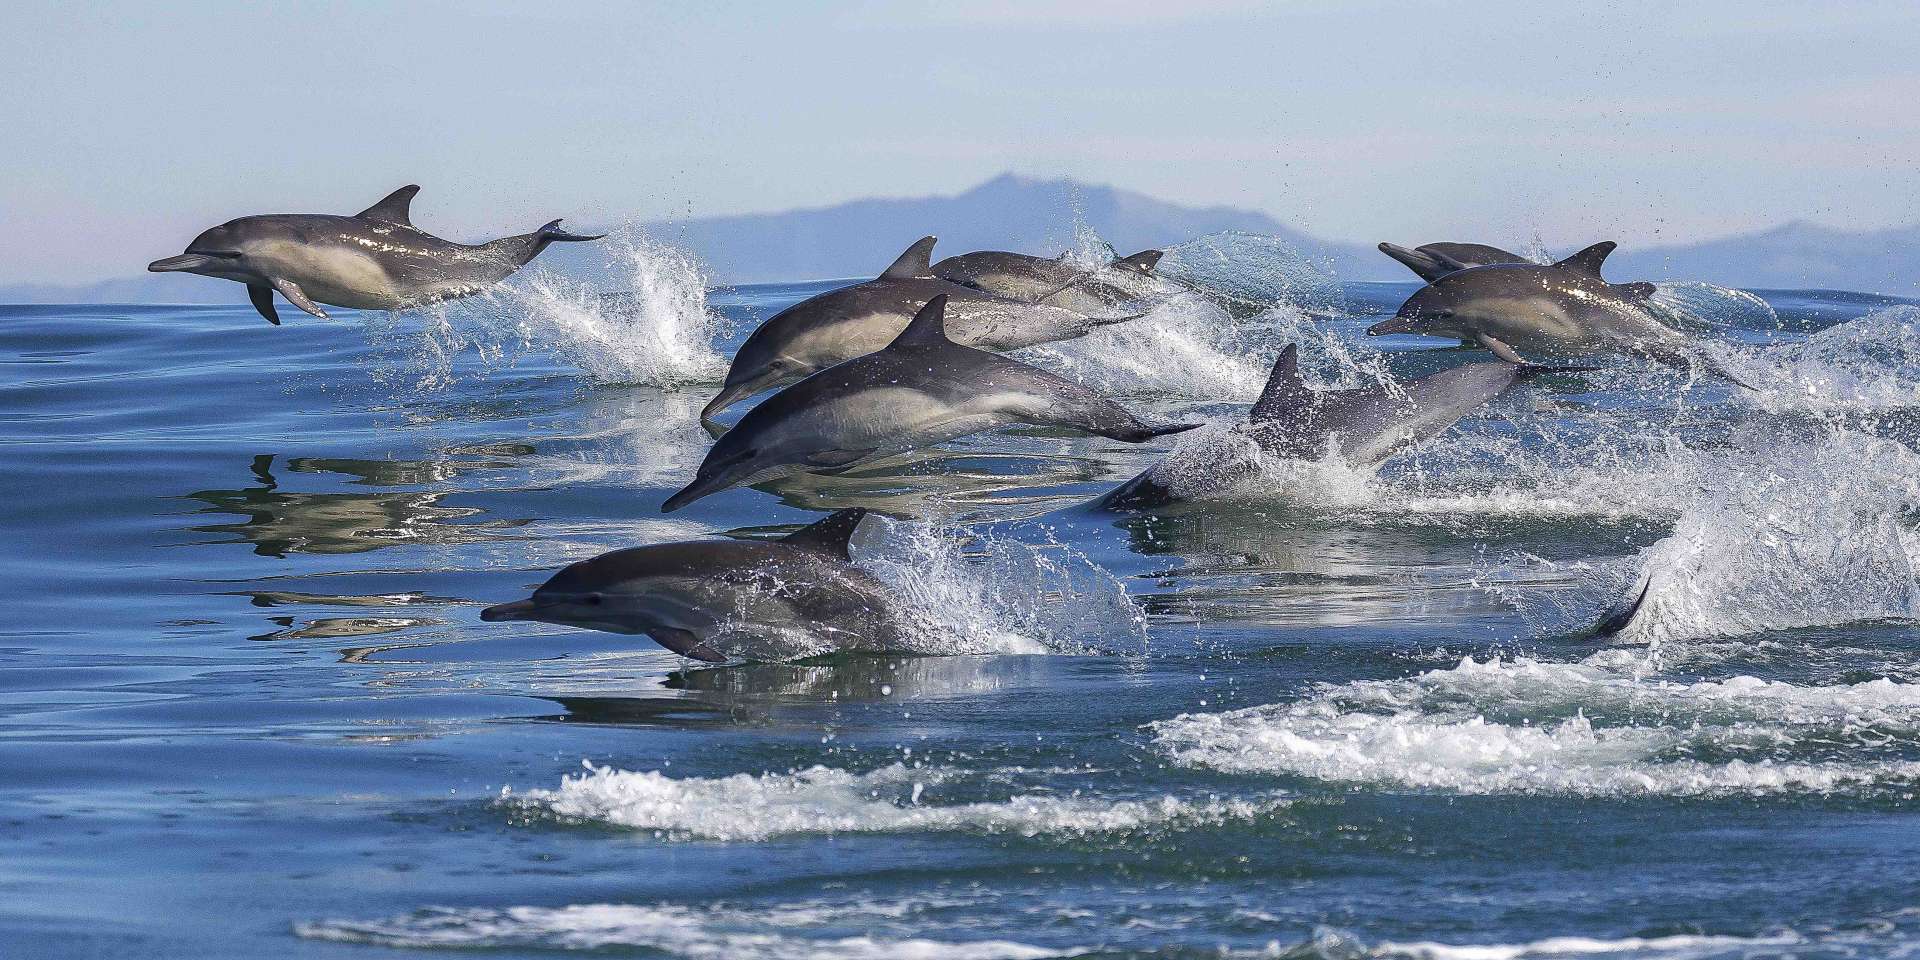 Watch dolphins swimming up close with our Eco Cruise in Tauranga